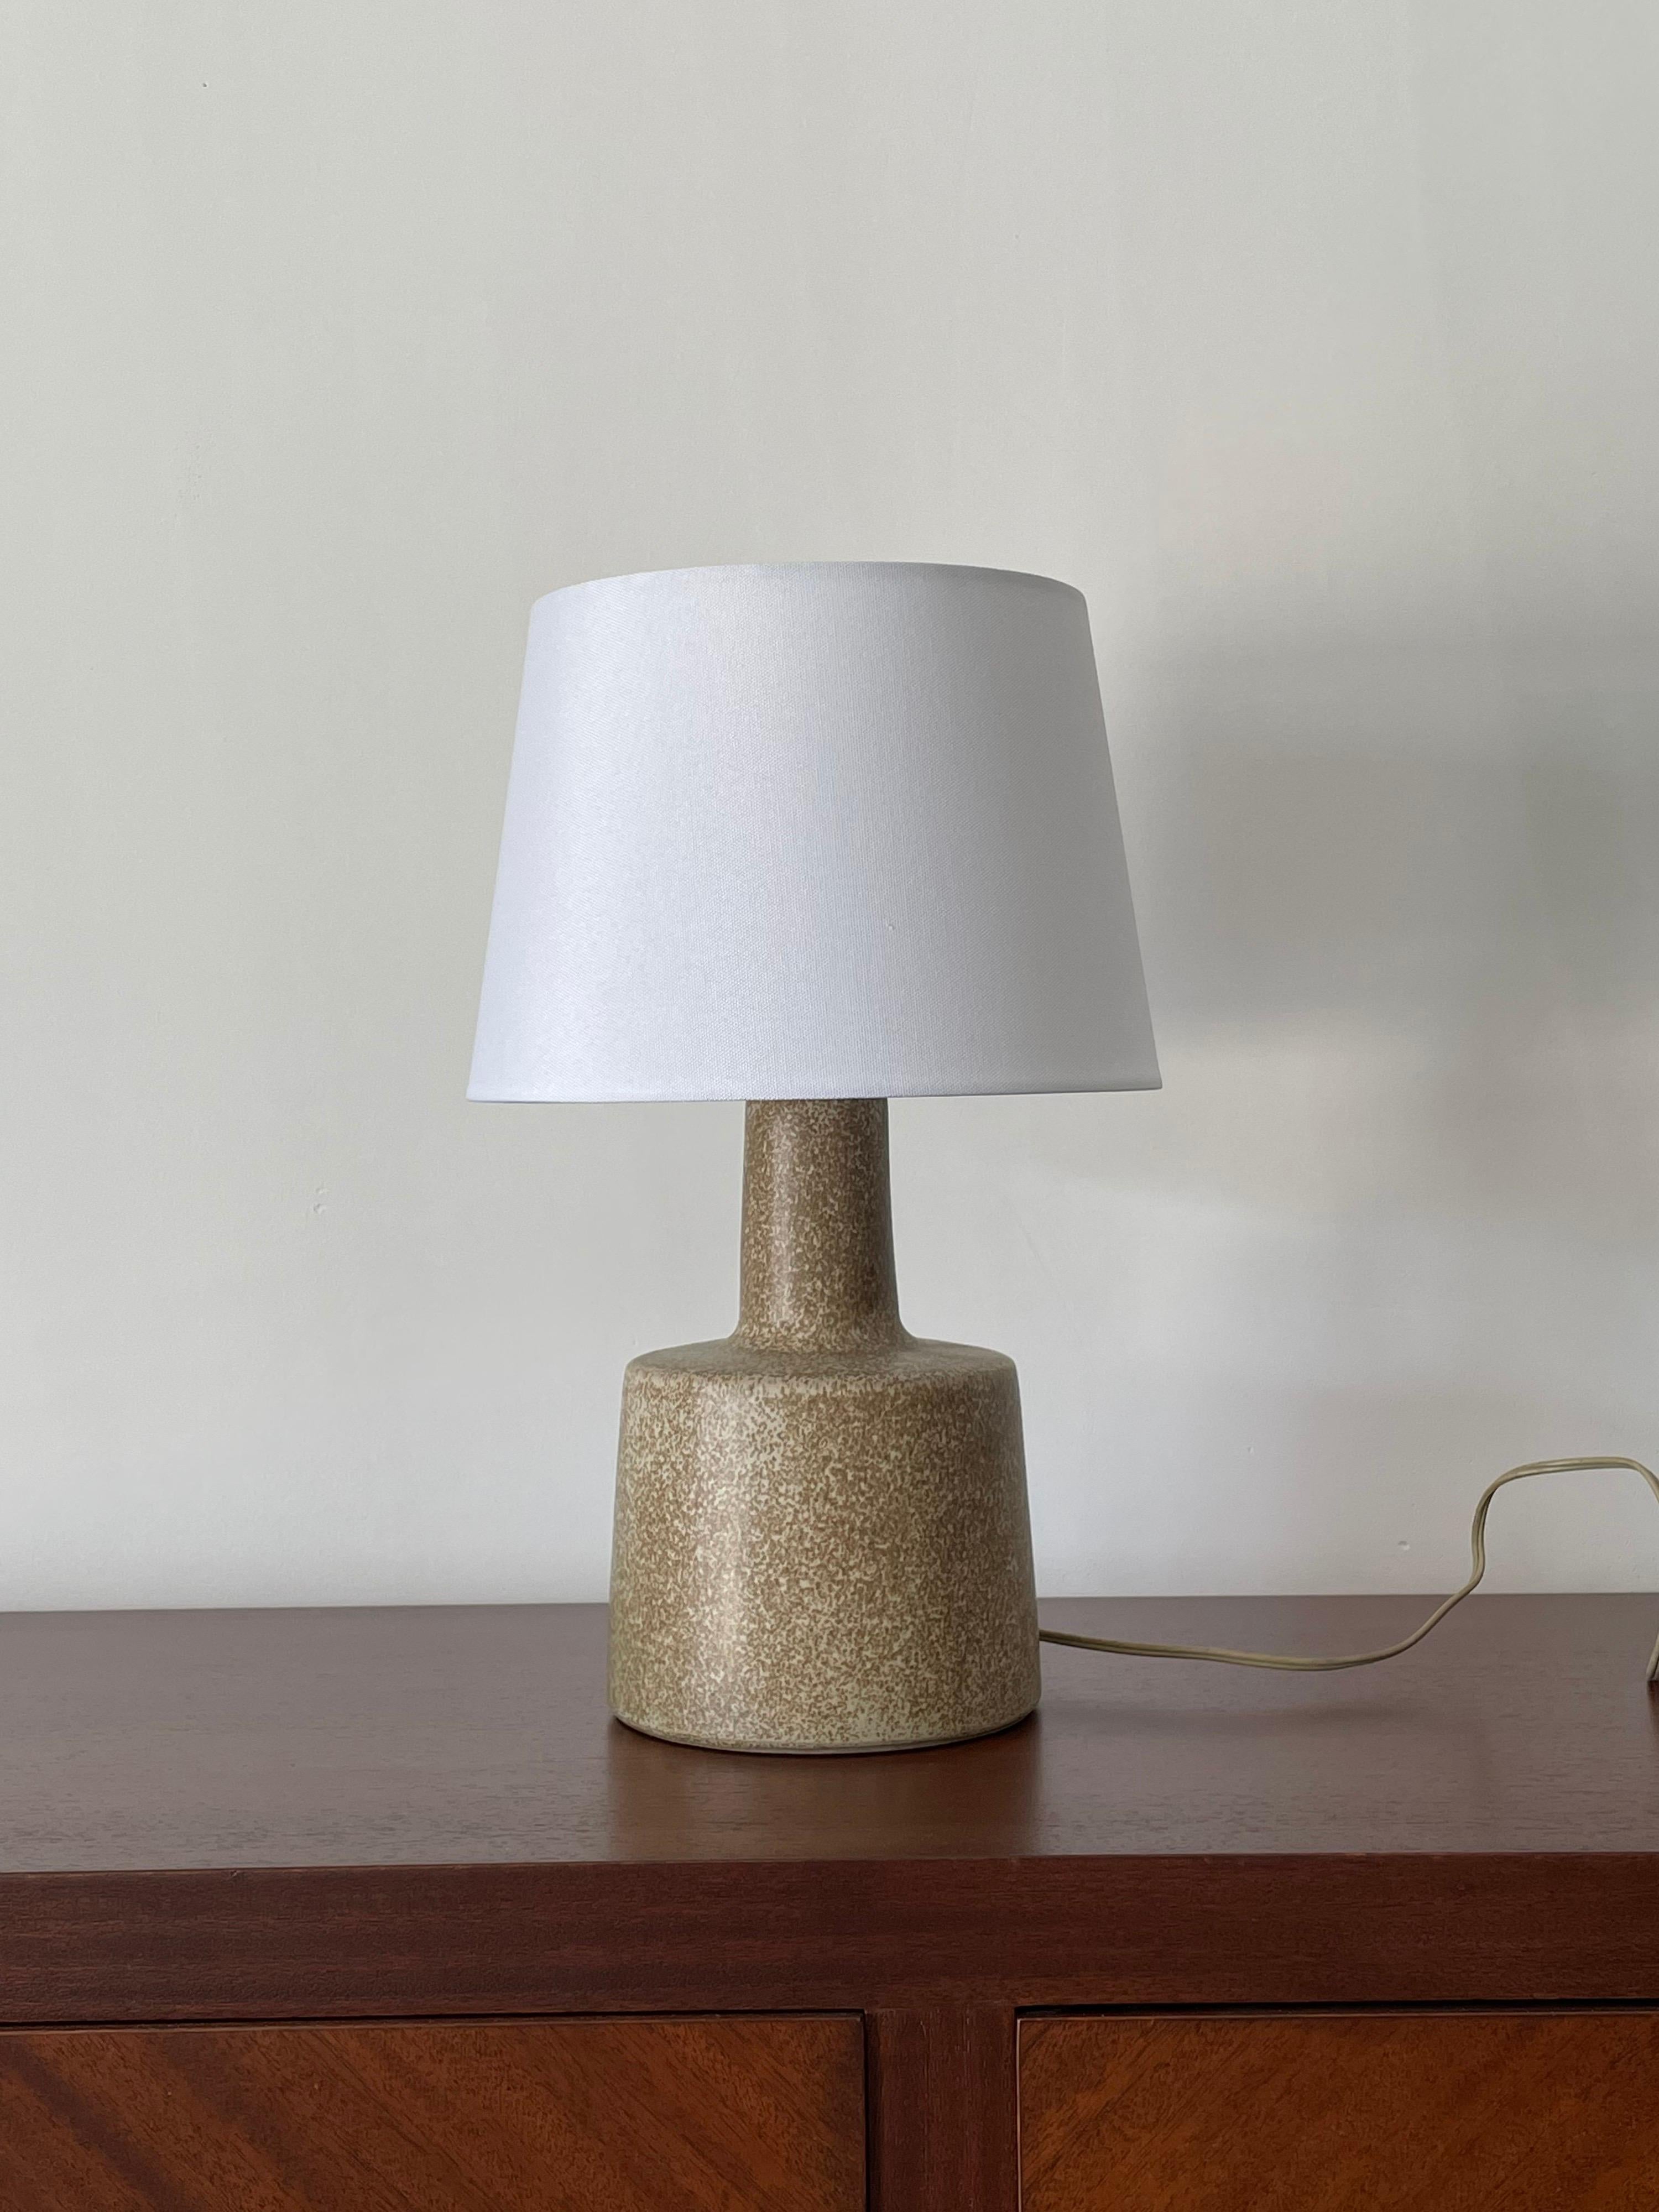 Table lamp designed by ceramicist duo Jane and Gordon Martz for Marshall Studios. Wonderful organic color palette with a sand base and tan speckles.

Dimensions
15.5” tall 
 10” wide 

Ceramic portion only 
9” tall 
6” across.